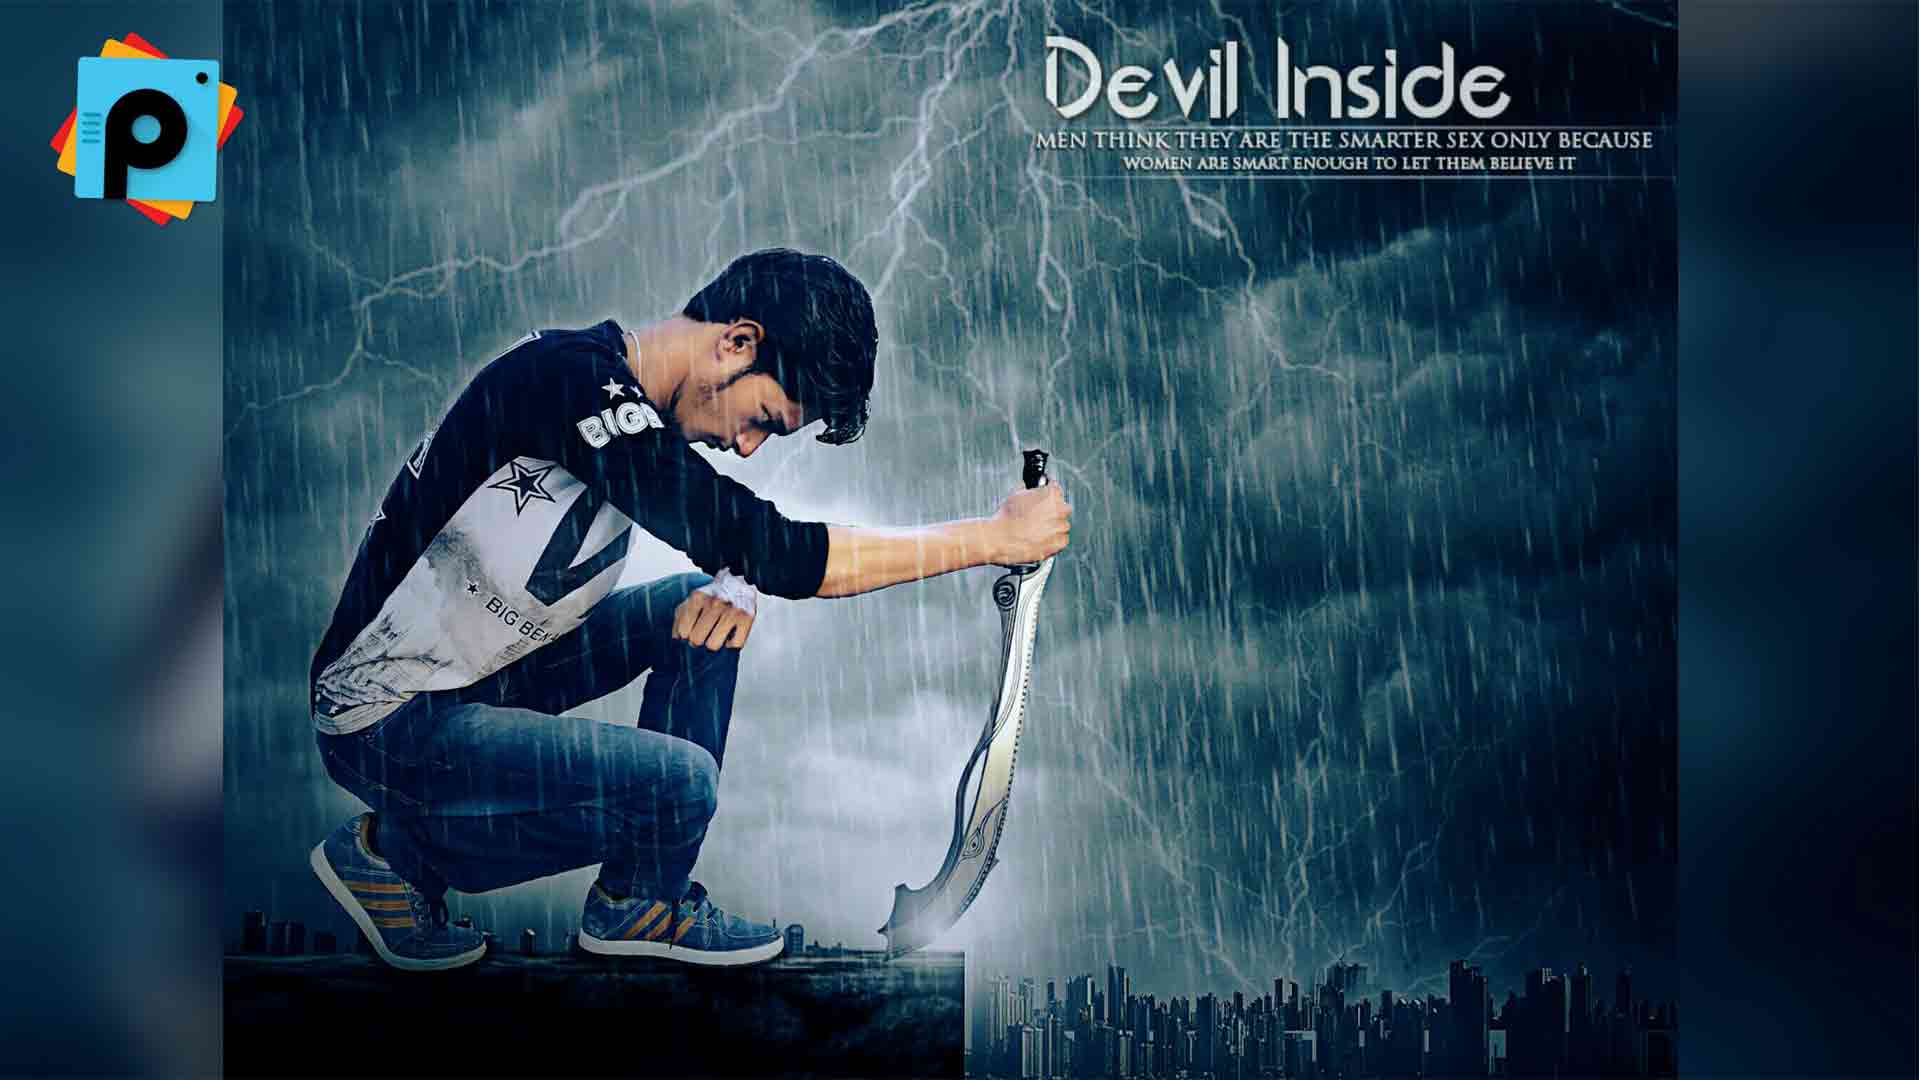 Devil Inside Action Movie Poster With Rain Effect